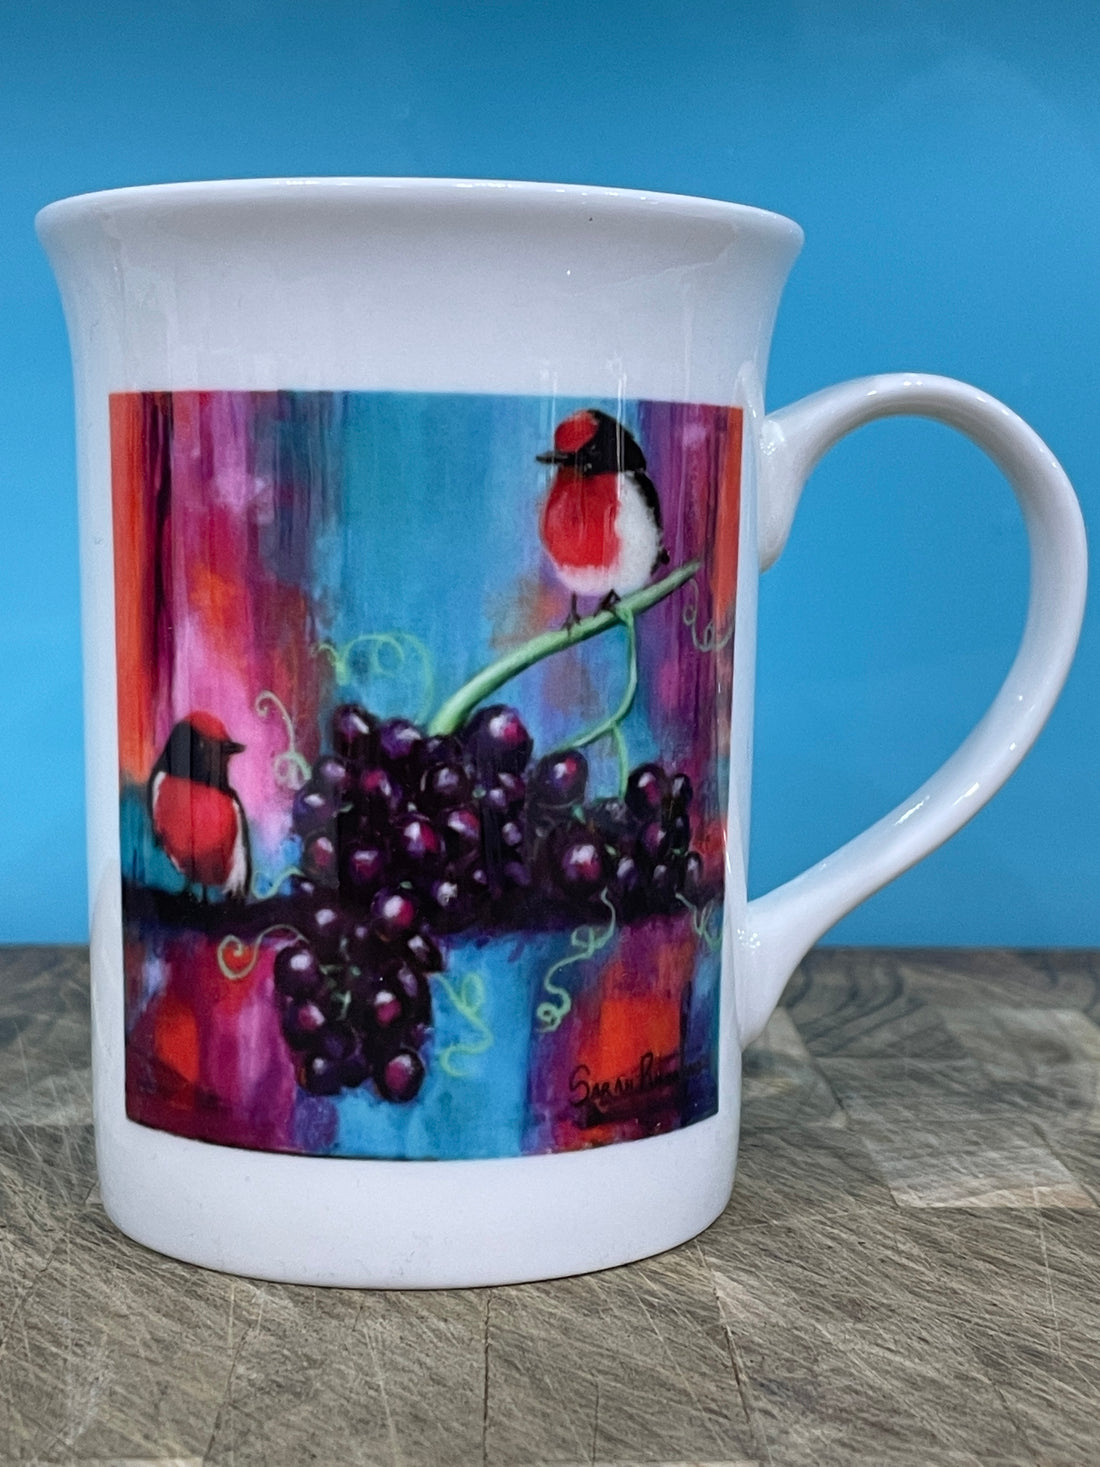 White bone china coffee mug with print of abstract realism red robins with red grapes on colourful abstract background.